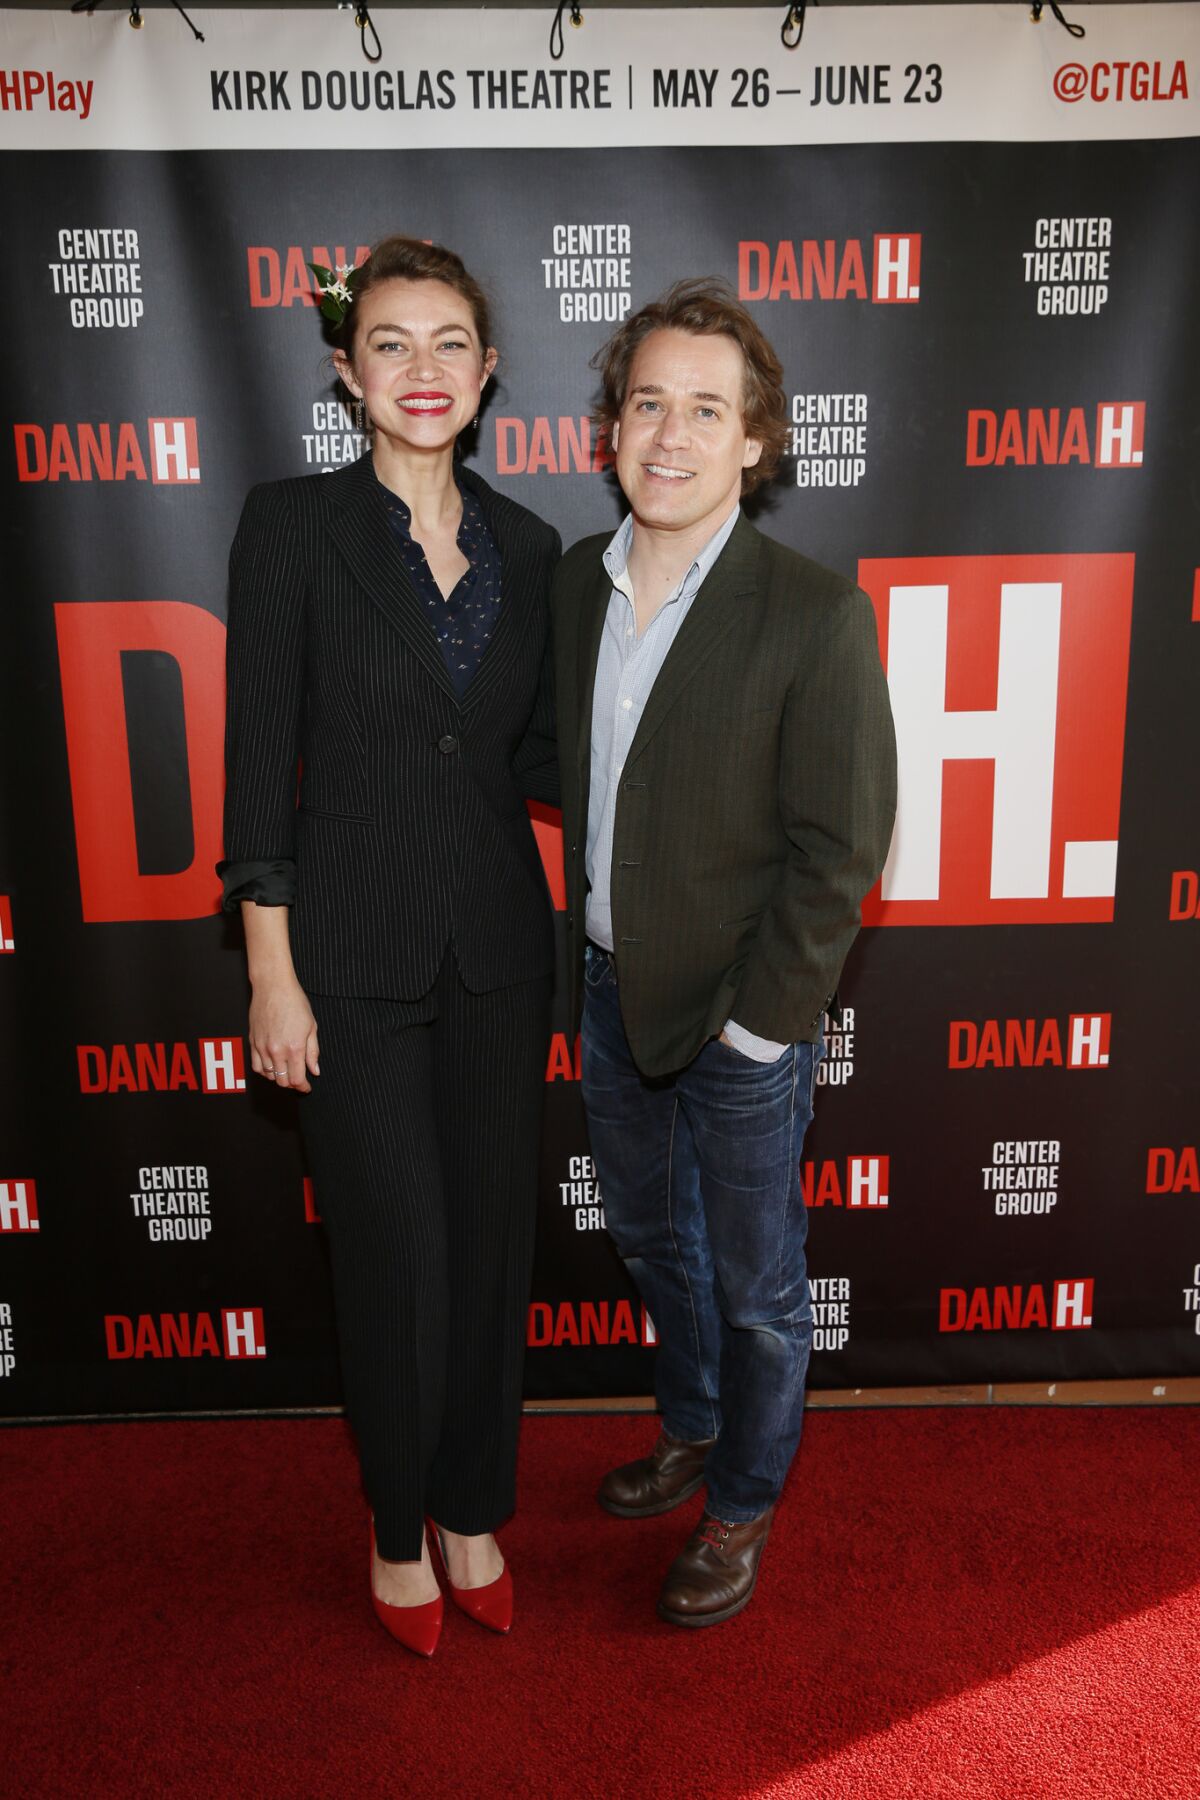 Elvy Yost and T.R. Knight at the world premiere of Lucas Hnath's "Dana H."